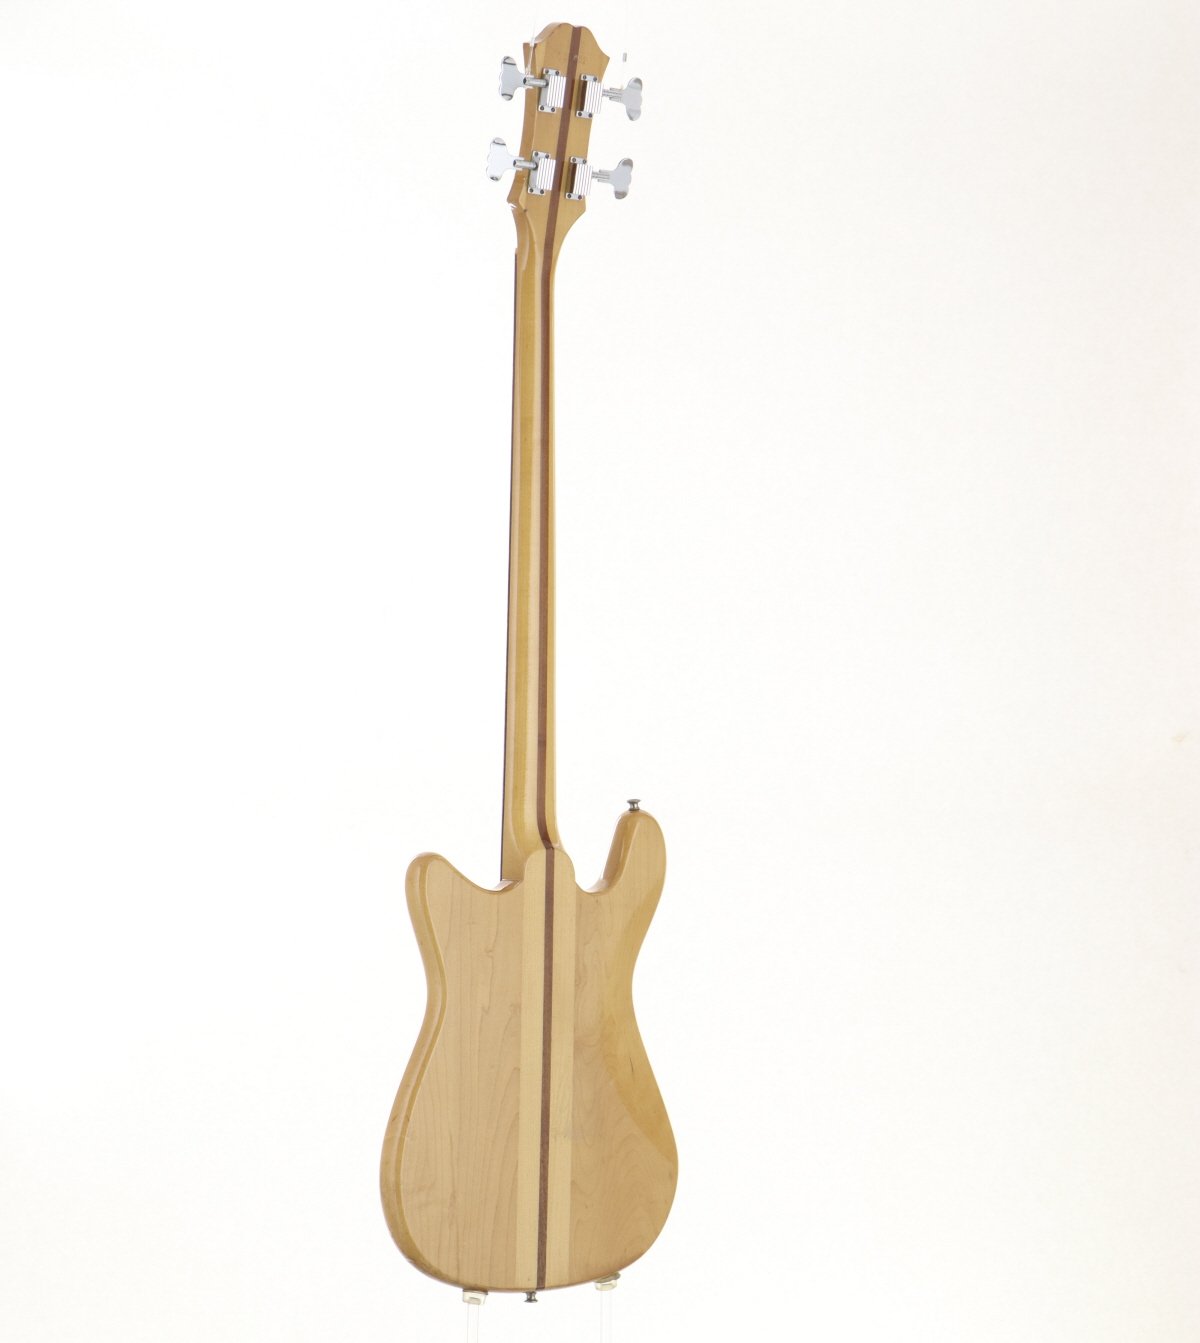 [SN 105062] USED Epiphone / Newport Bass Natural [1970's / Made in Japan][3.75kg] Epiphone Electric Bass [08]